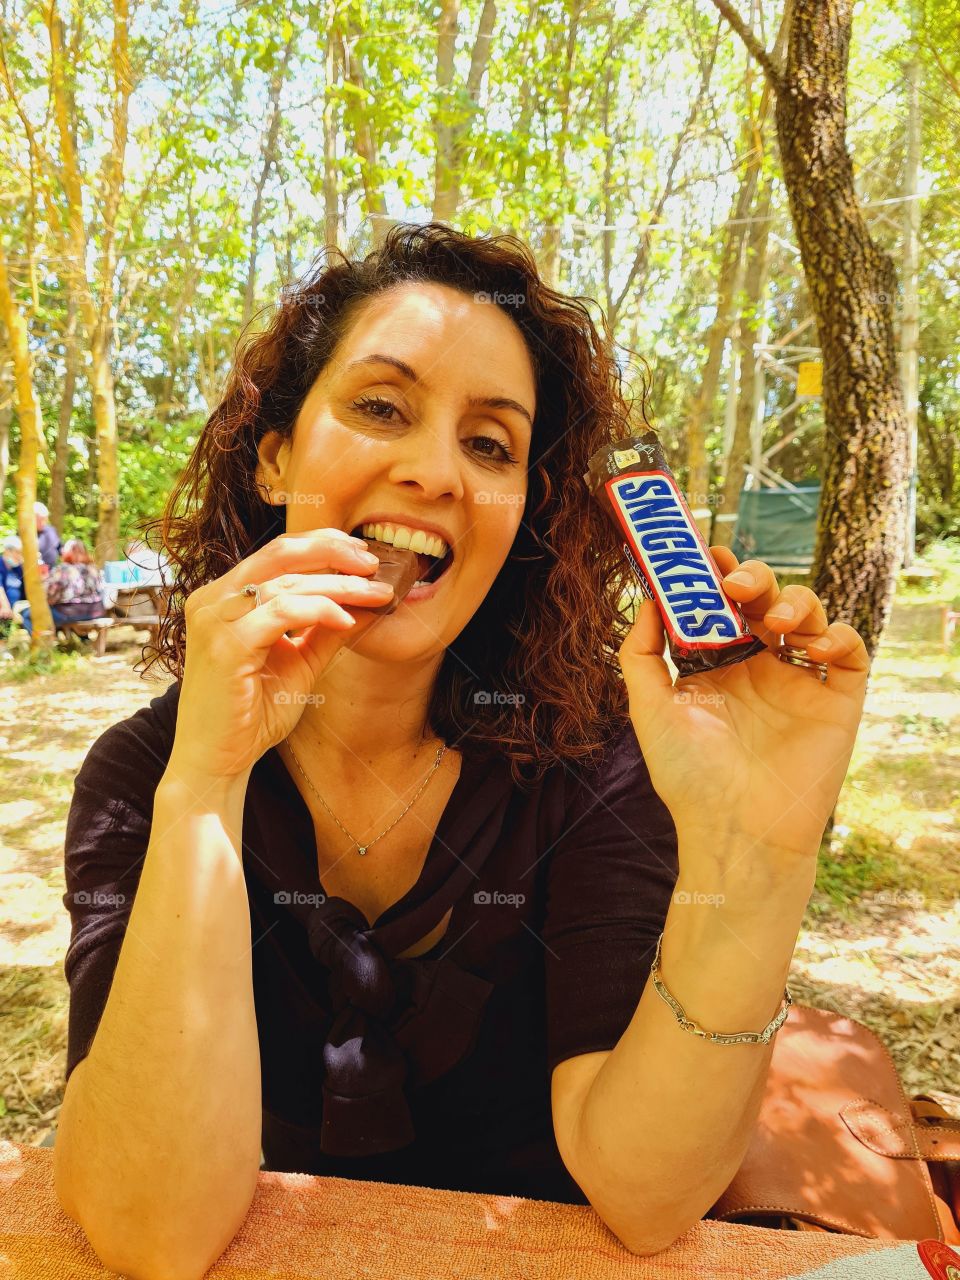 Smiling Woman satisfied eats her Snickers at the park